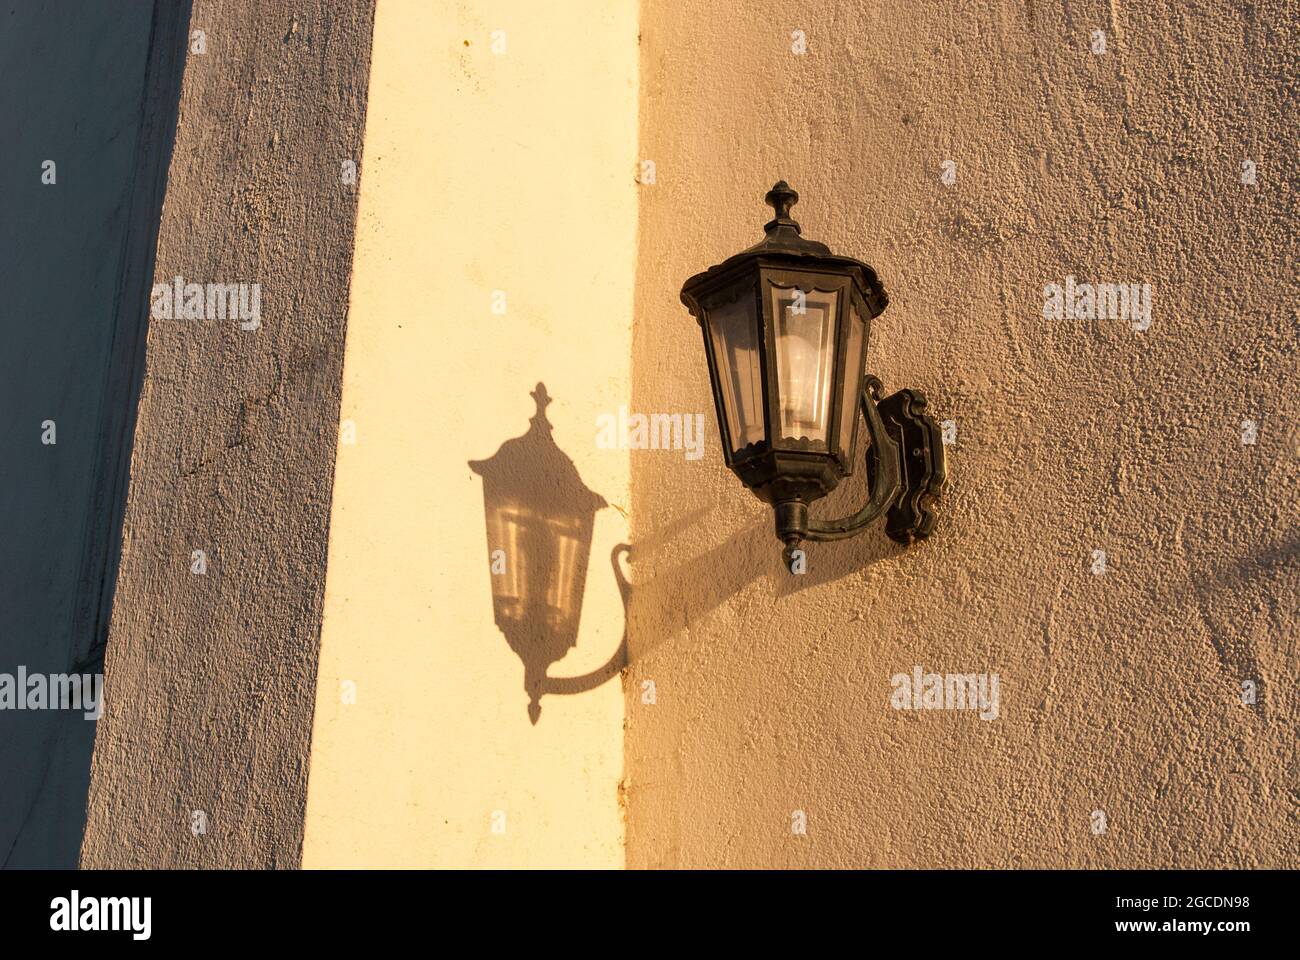 Schattenspiel: Laterne  im Abendlicht in Südfrankreich - shadow play: an antique lantern at a vineyard in the evening light in the South of France. Stock Photo